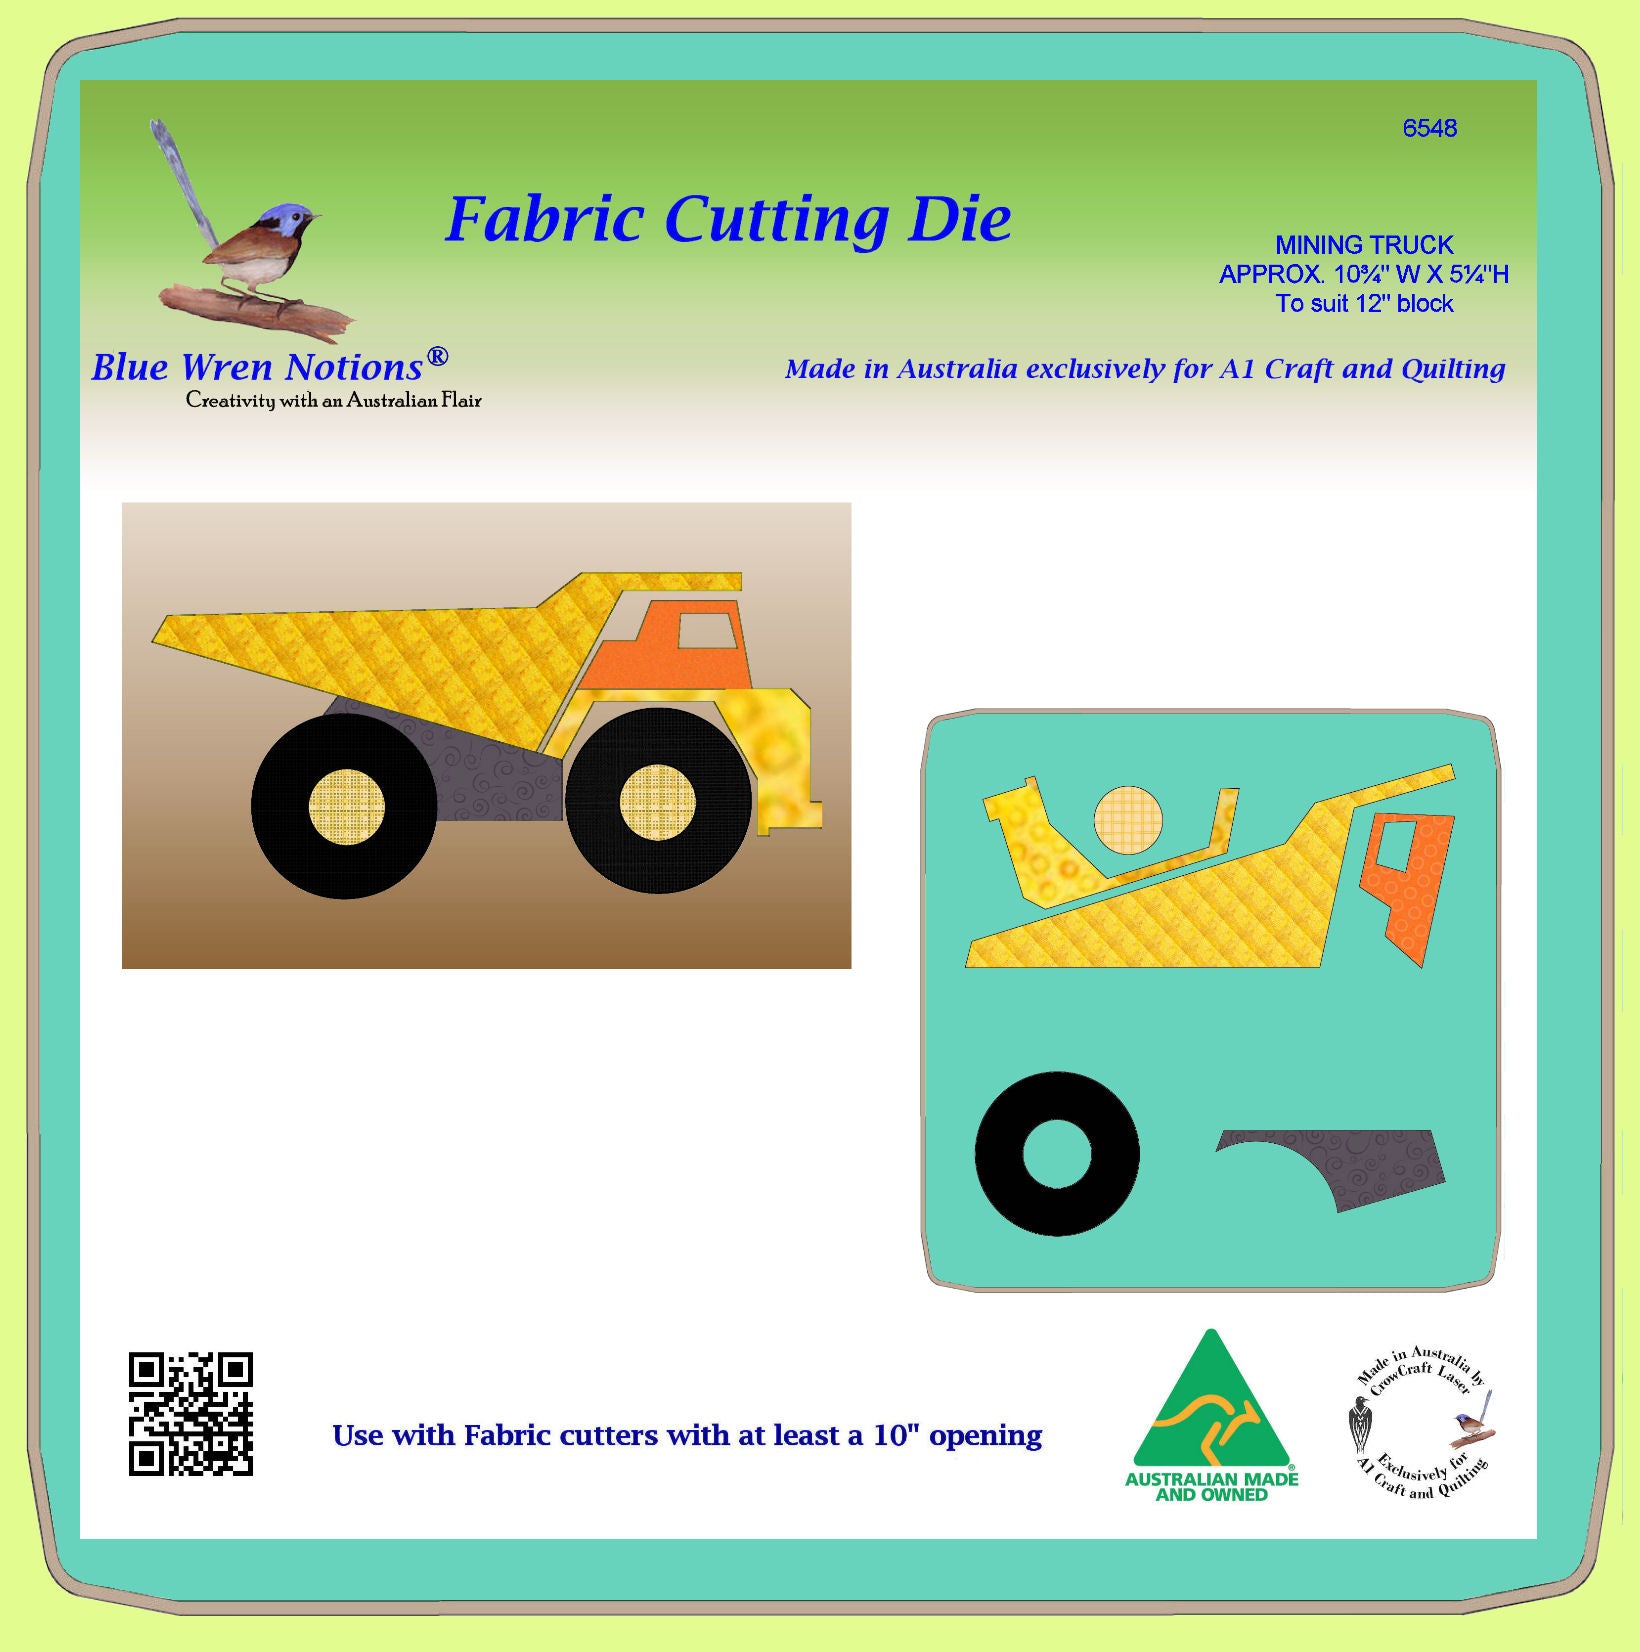 Mining Truck Approx, 10¾" x 5¼" to suit 12" block or T Shirt- 6548 Mat included